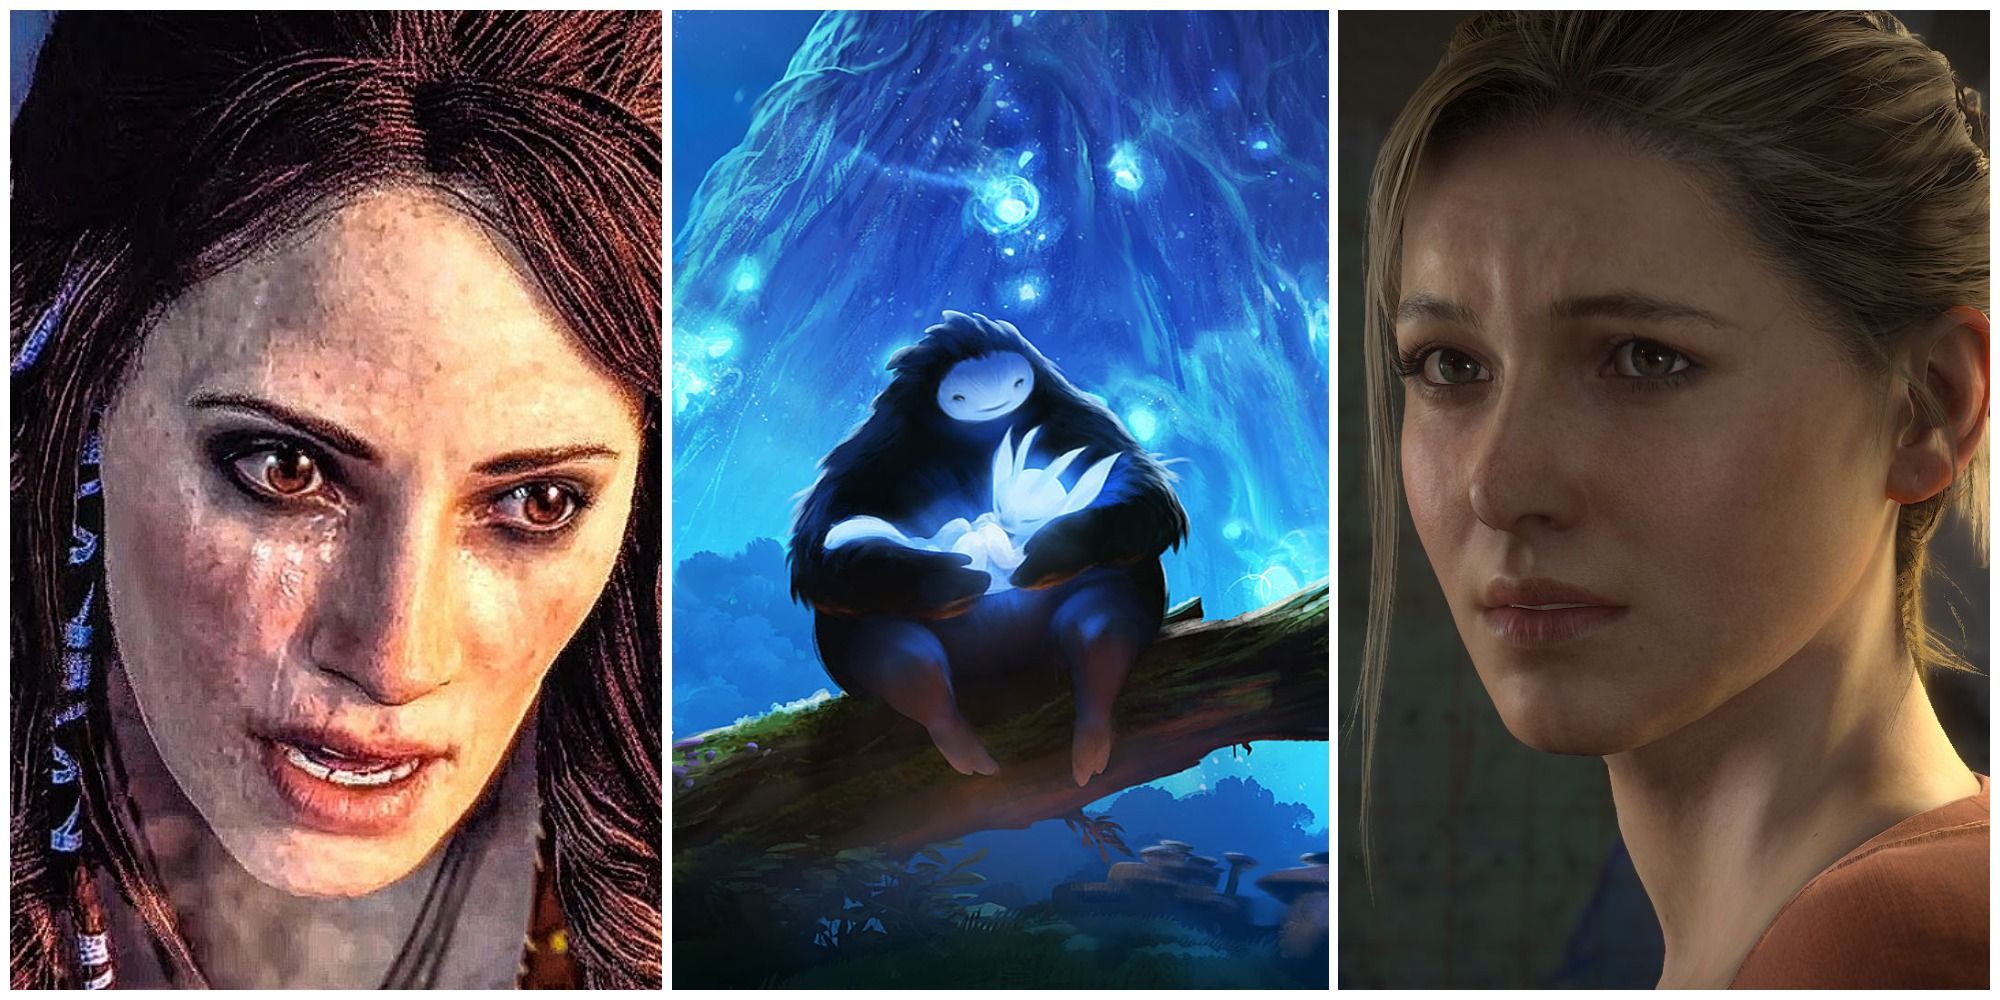 Split image of Freya from God of War, Naru from Ori and the Blind Forest hold Ori, and Elena from Uncharted 4